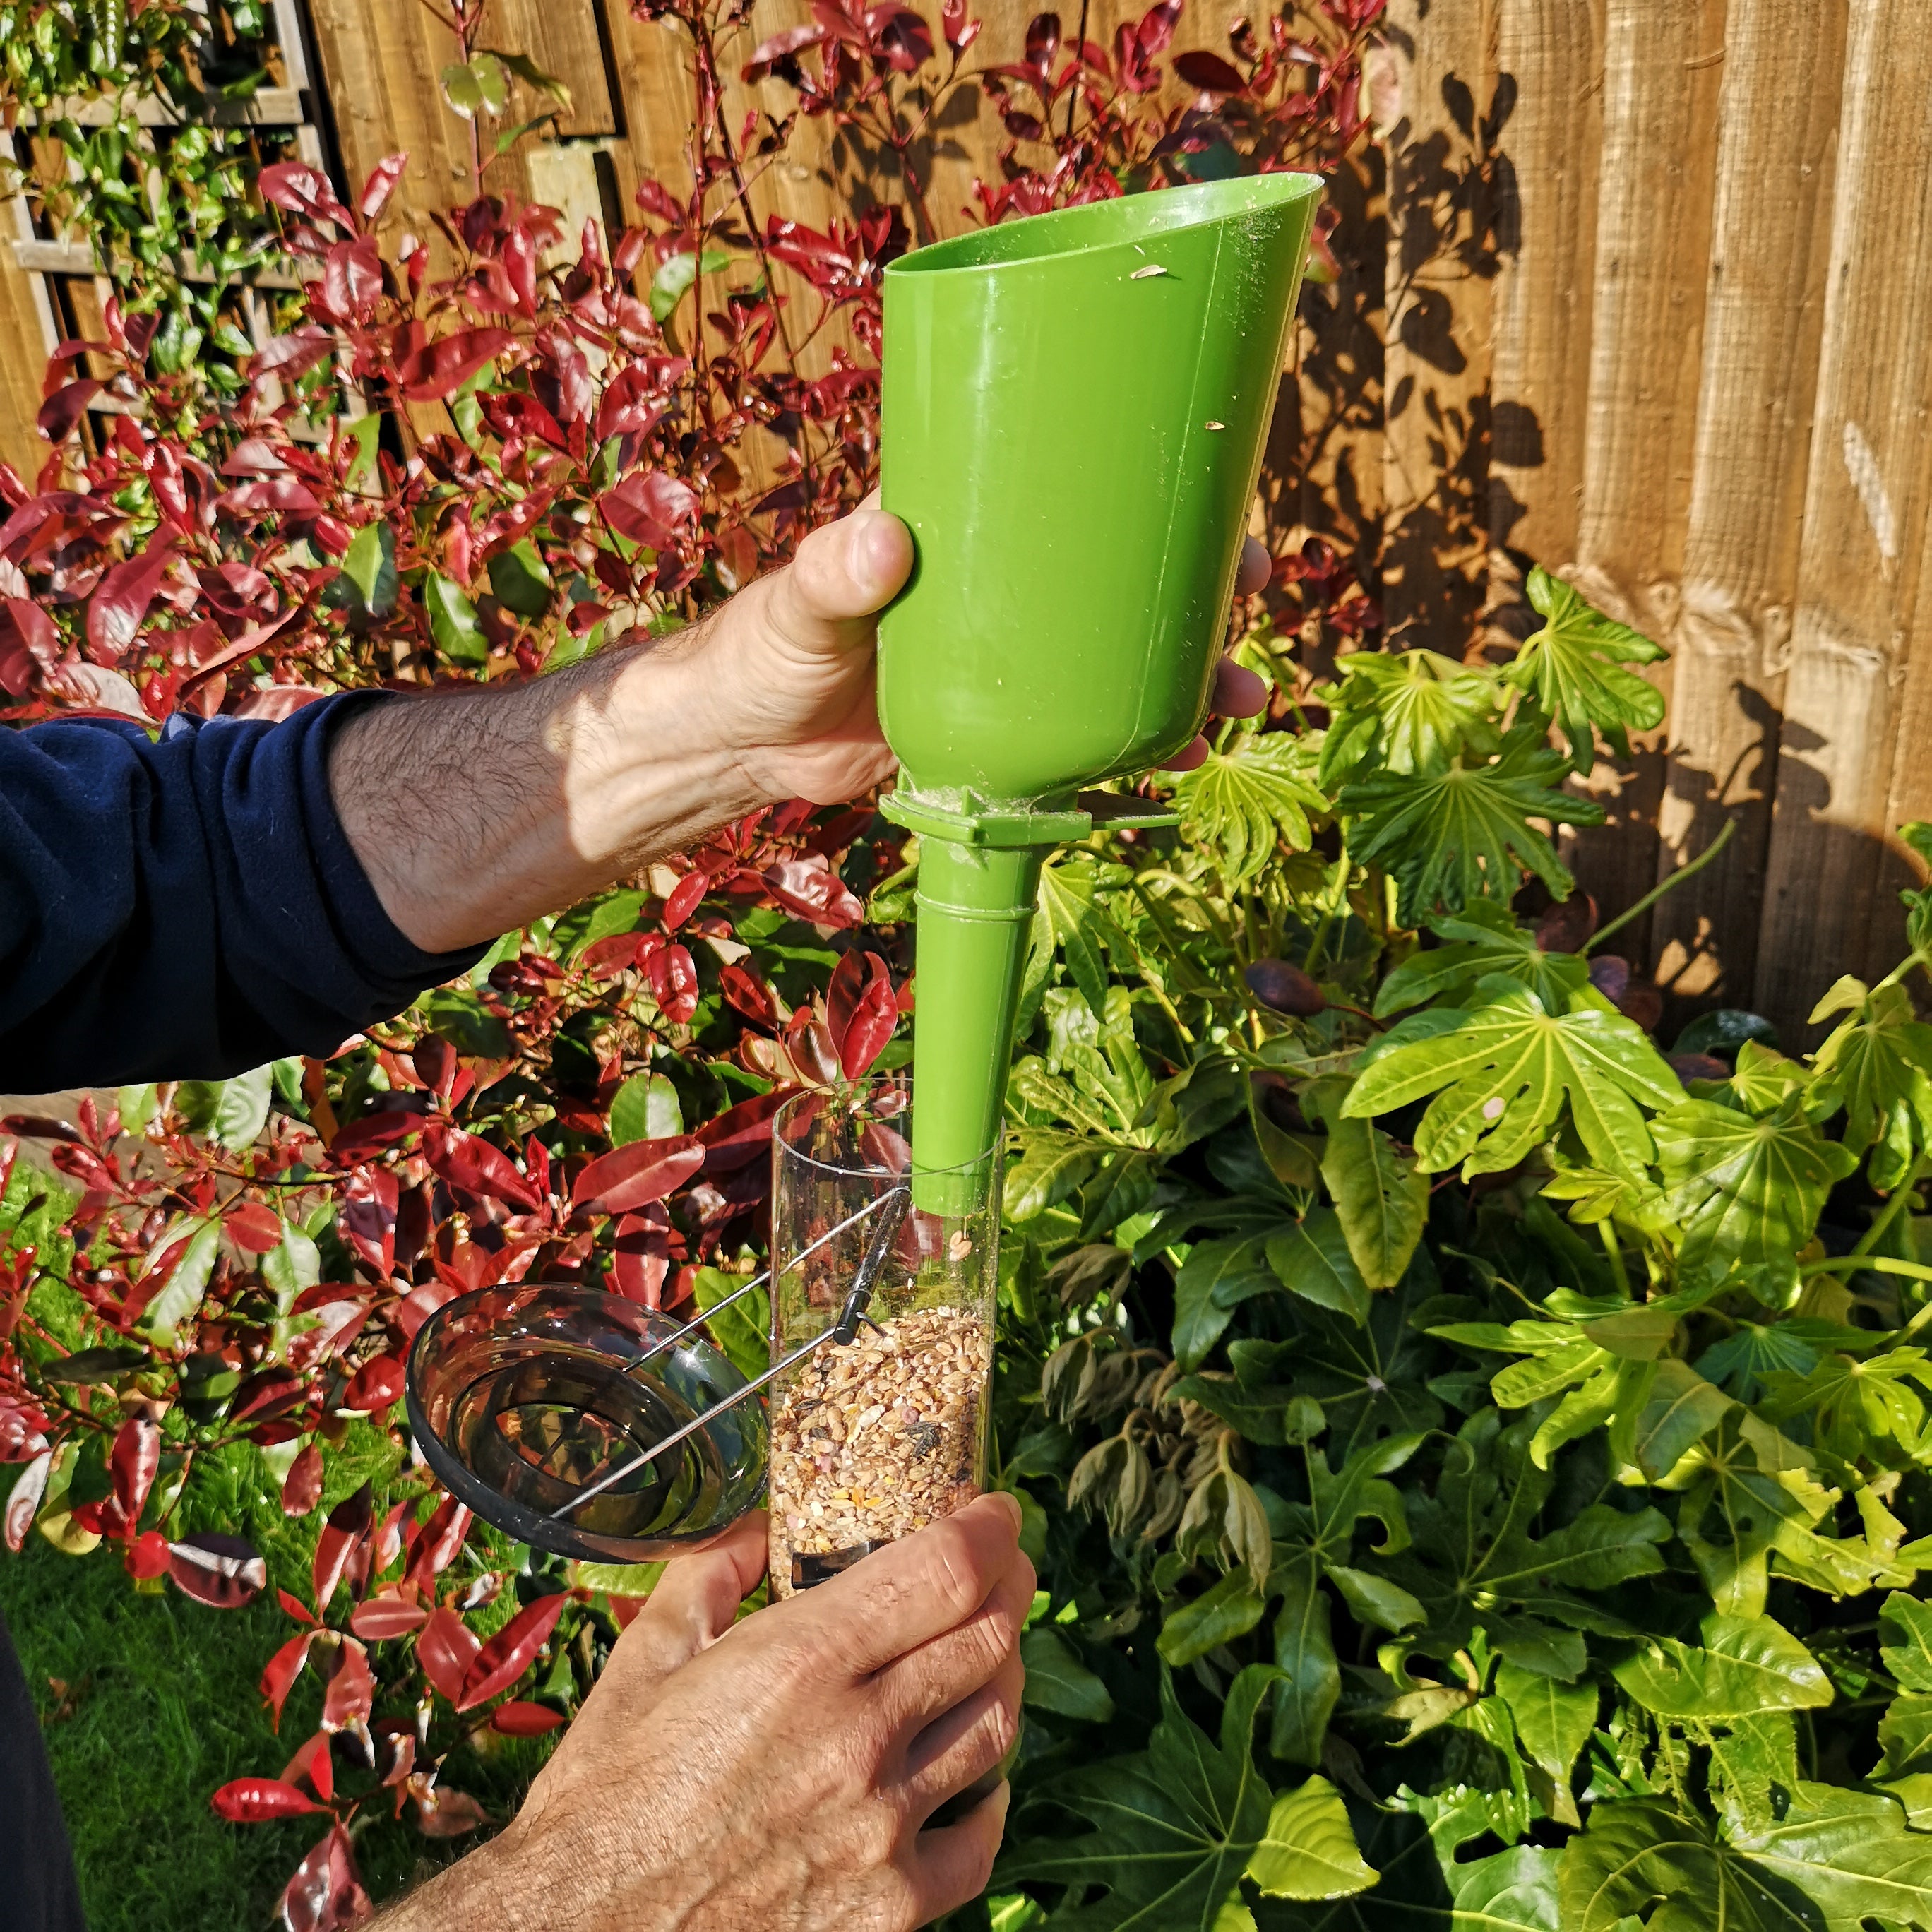 Tom Chambers Green Funnel Style Plastic Multi Purpose Scoop with Release Hatch for Filling Bird Feeders